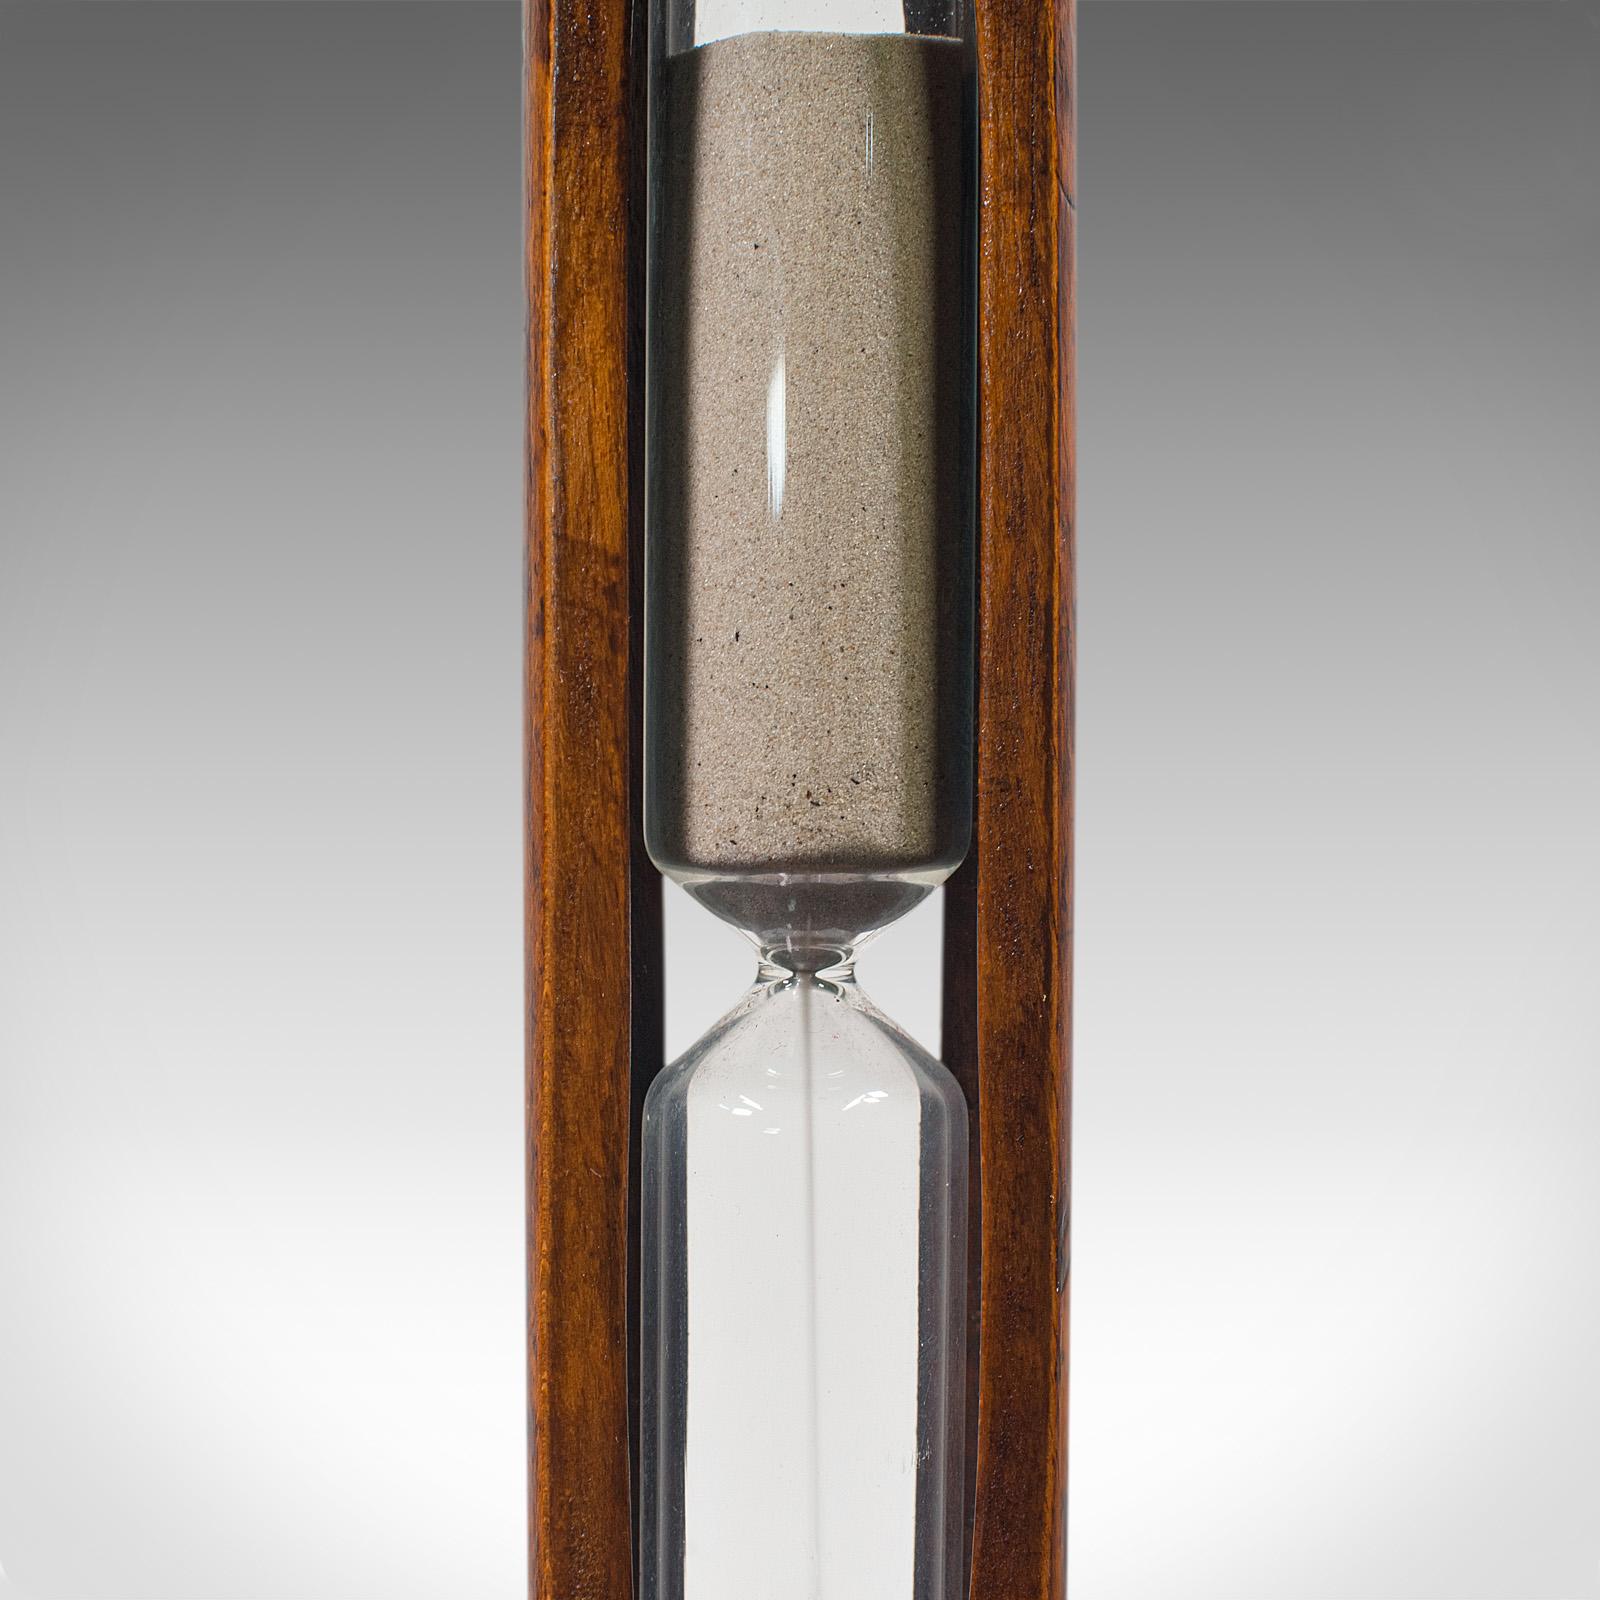 Antique Cookie Baking Sand Timer, English, Fruitwood, Glass, Victorian, C.1900 4